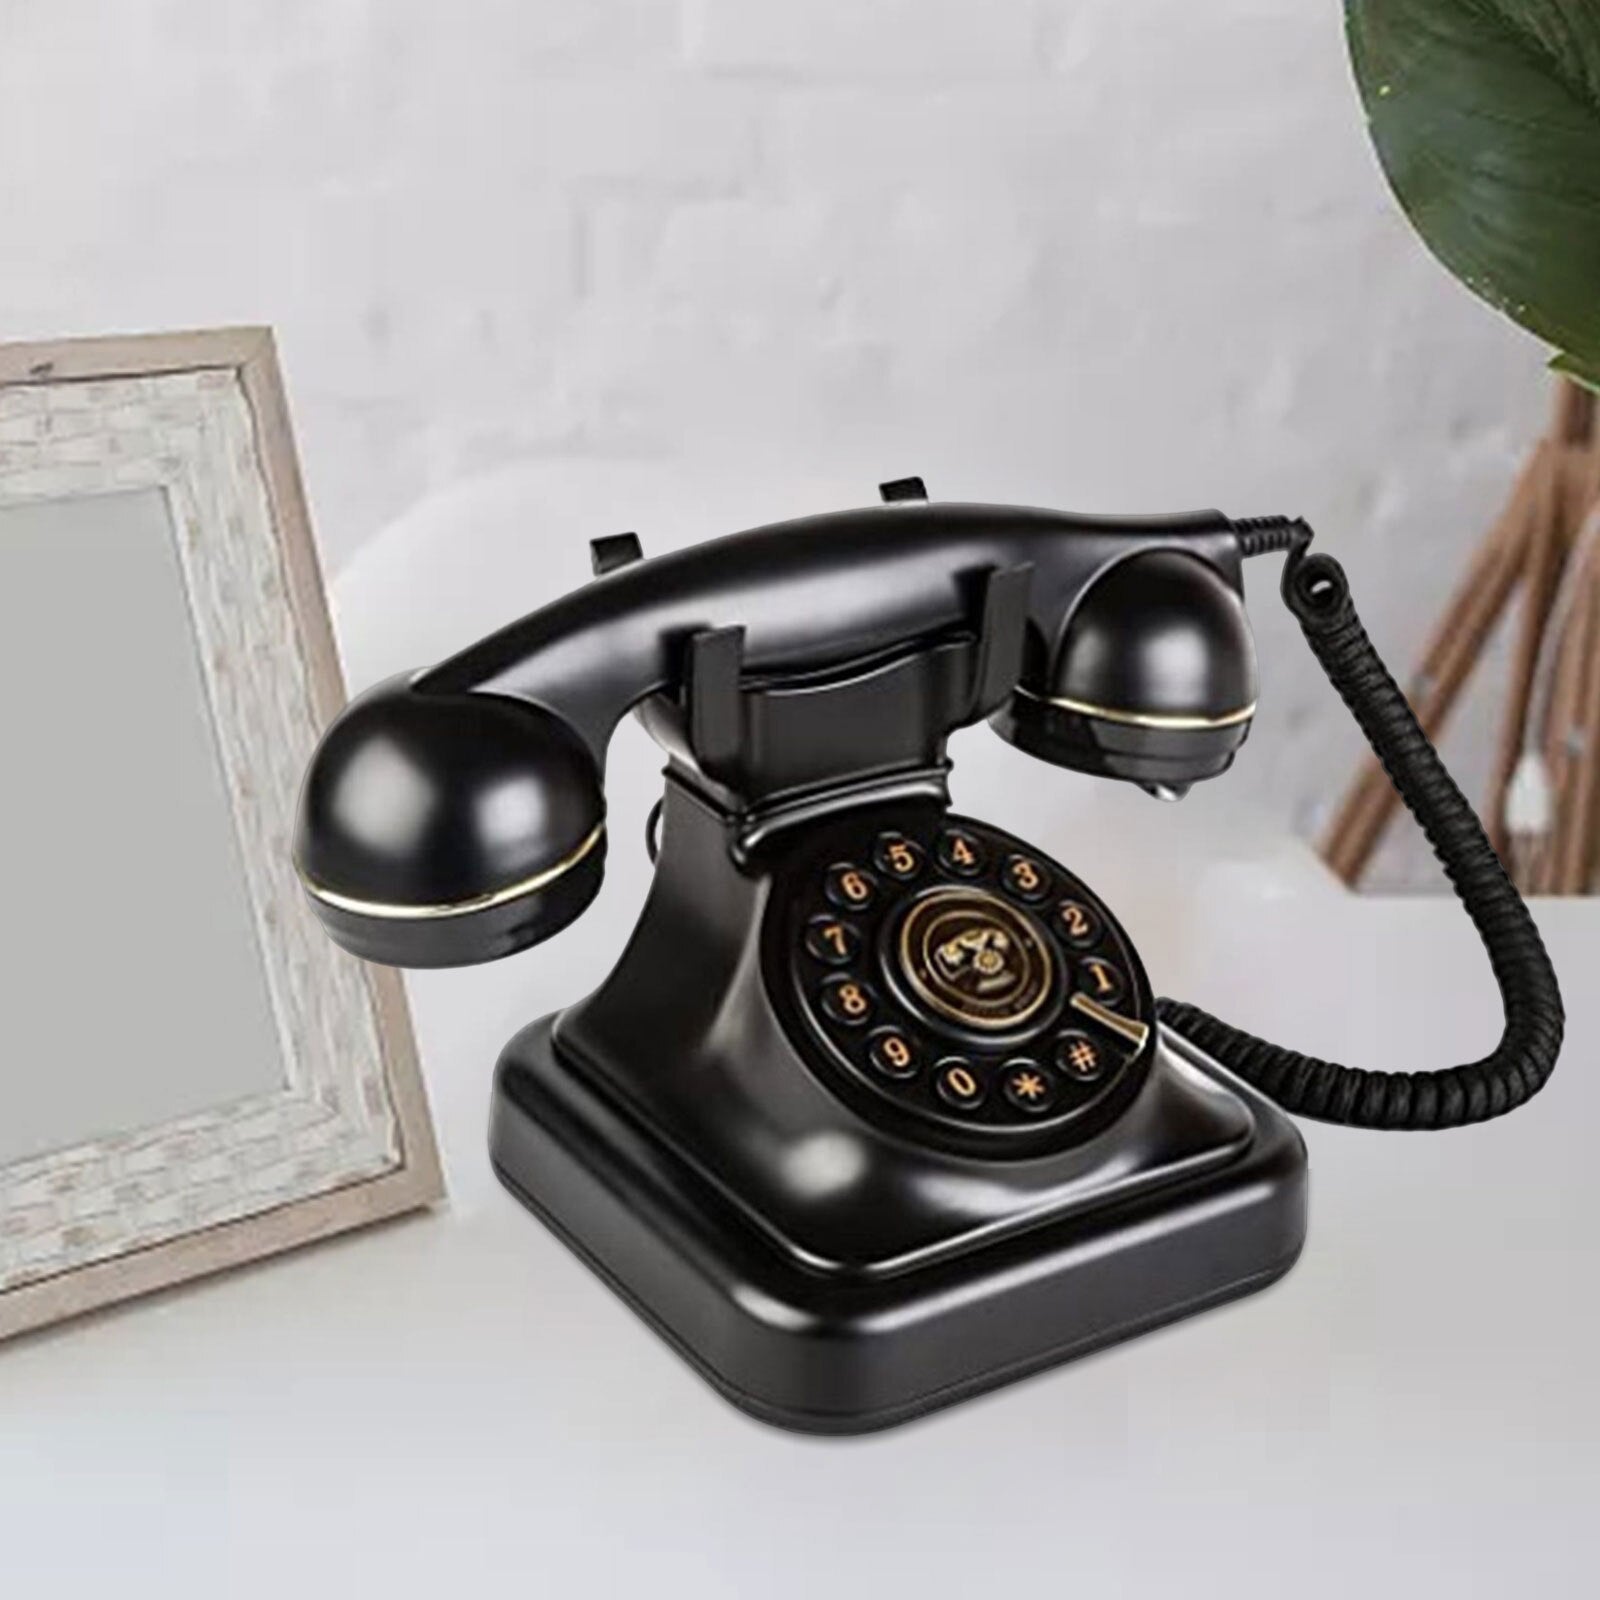 Corded Phone Old Fashioned Landline Phones Volume Adjustment Function with Mechanical Bell Button Dial for Home Decorations